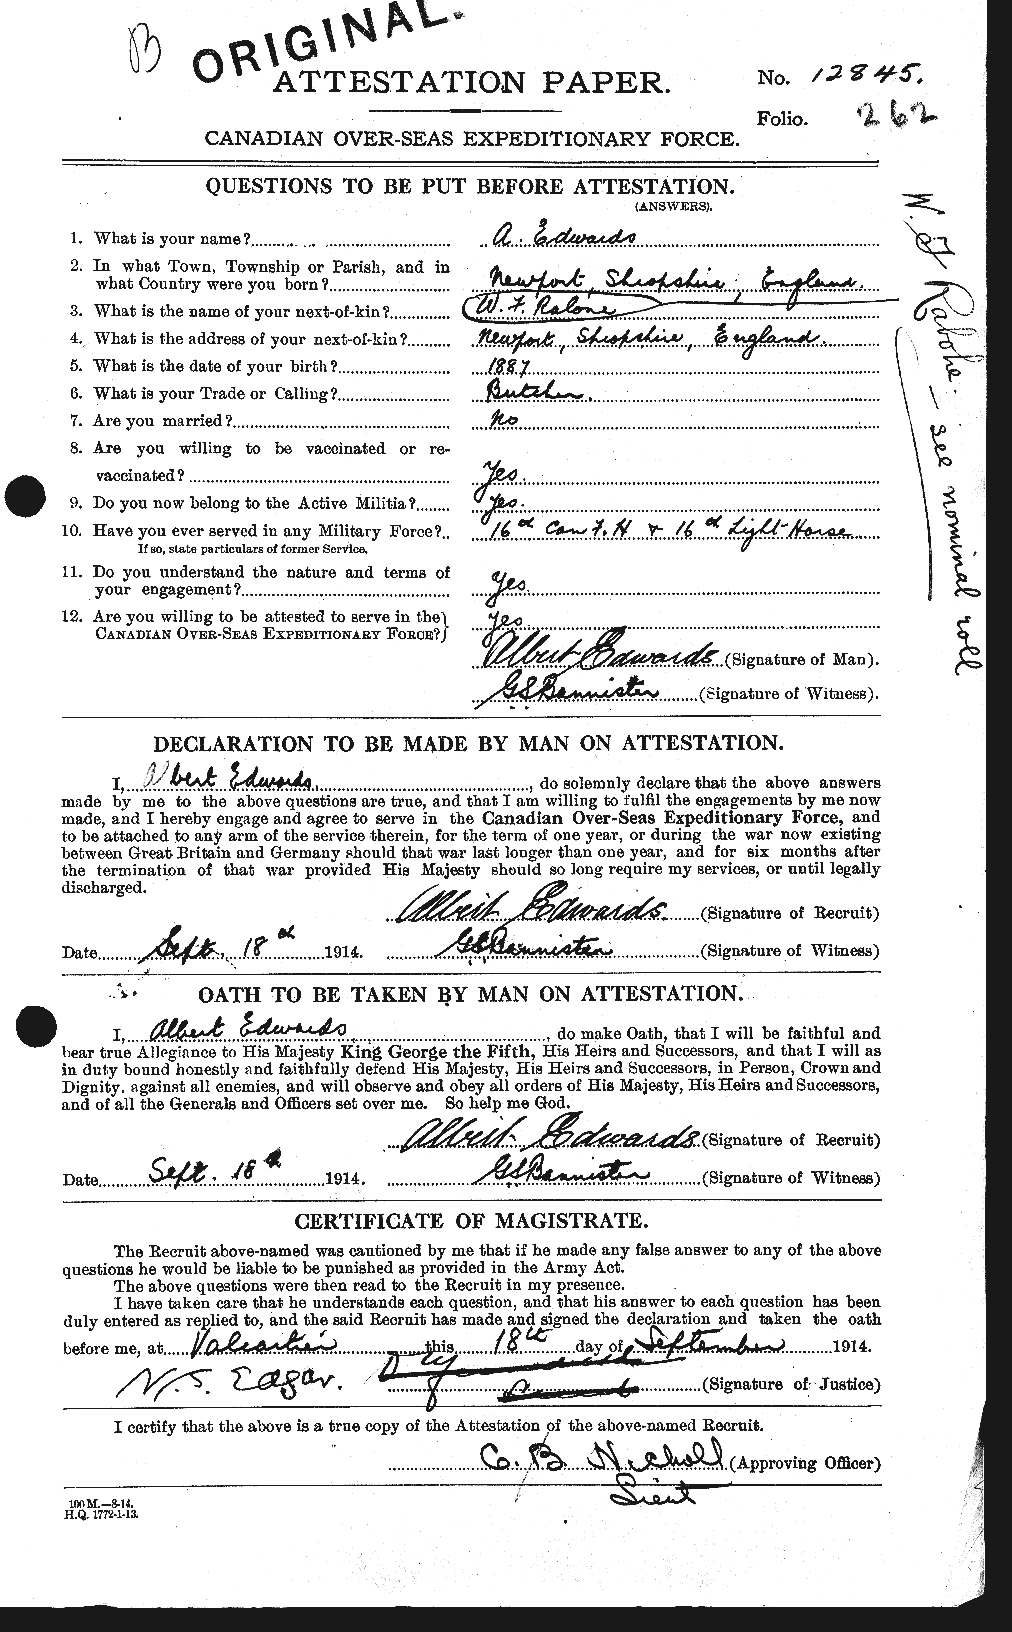 Personnel Records of the First World War - CEF 690991a